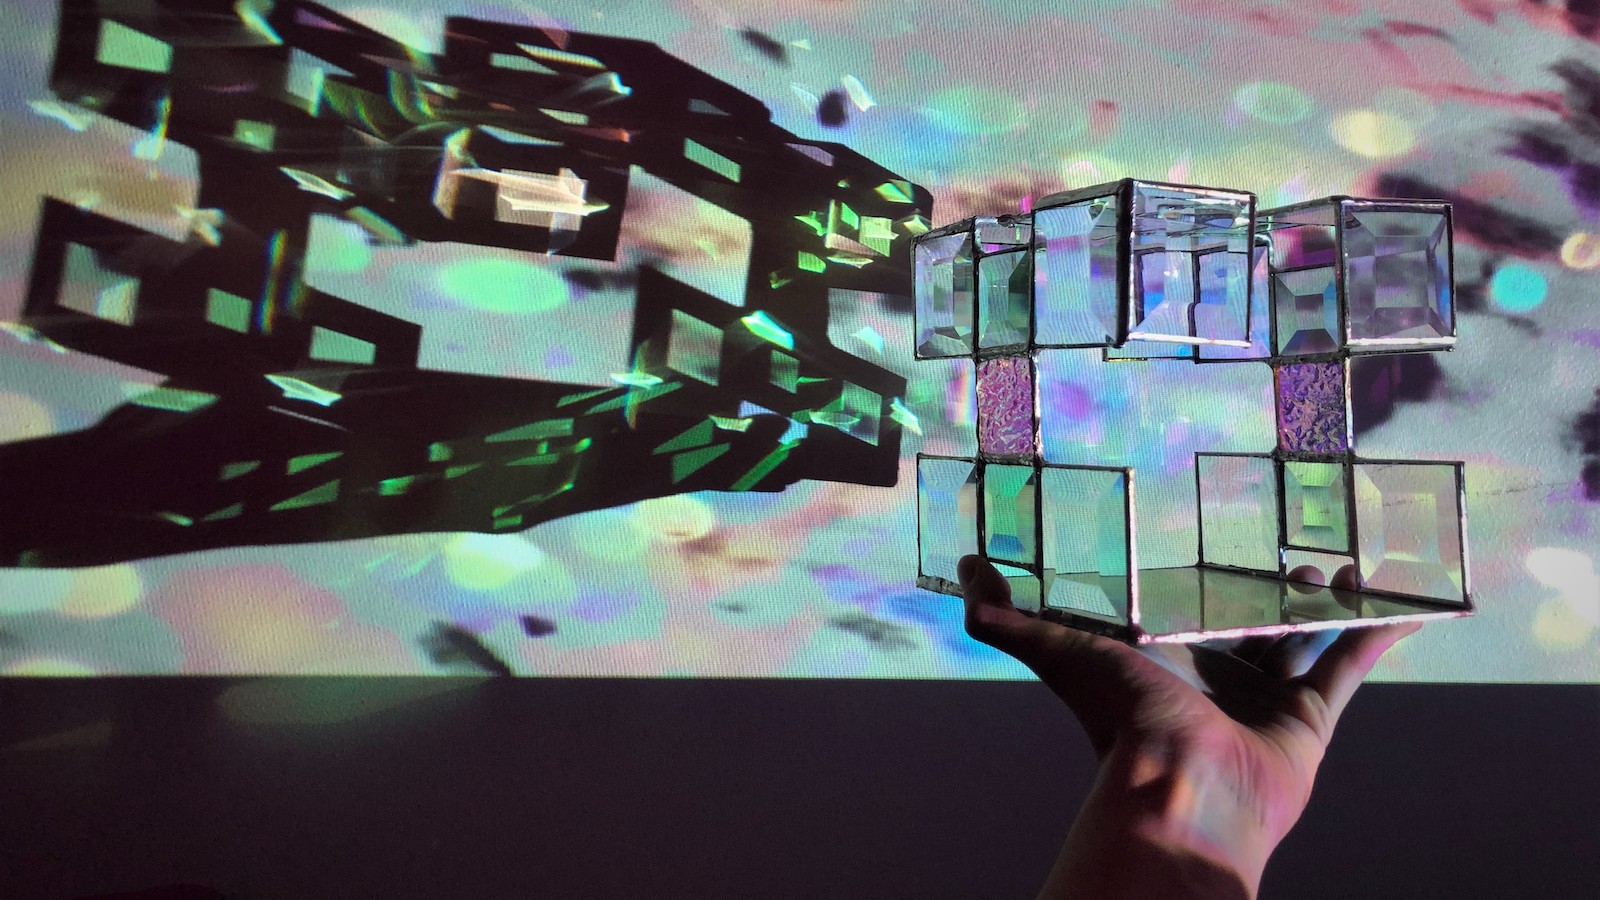 In a dark room, a hand holds a cube-like tesseract with square cutouts that refract multi-colored lights. The tesseract is held in front of a projector, casting a shadow of the cube onto a screen with twinkling circles of lights around it.